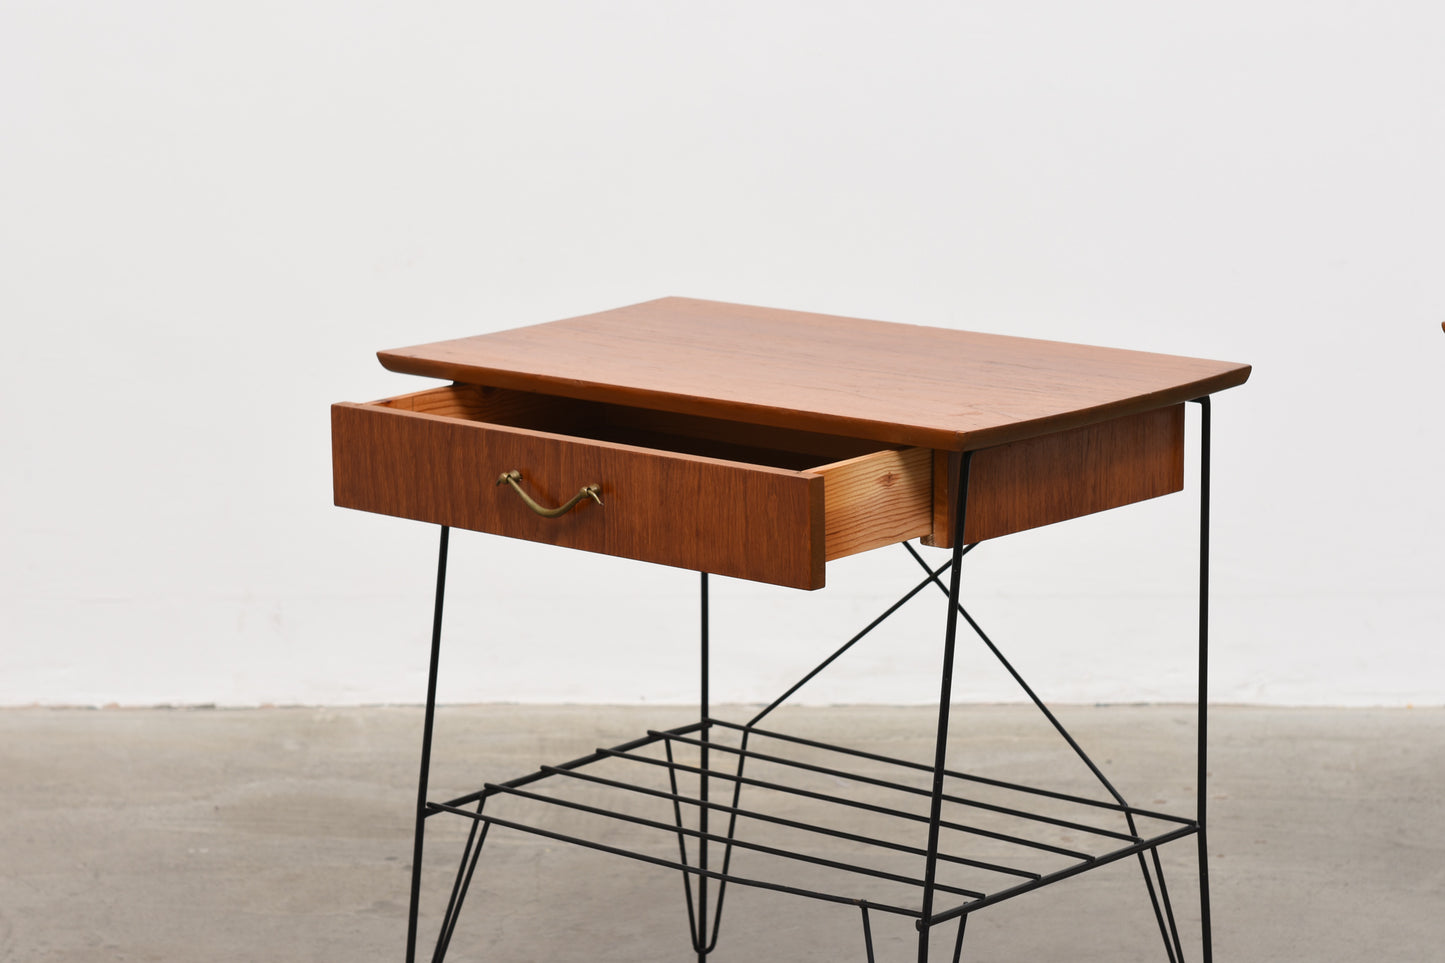 1950s bedside tables by Nils Strinning